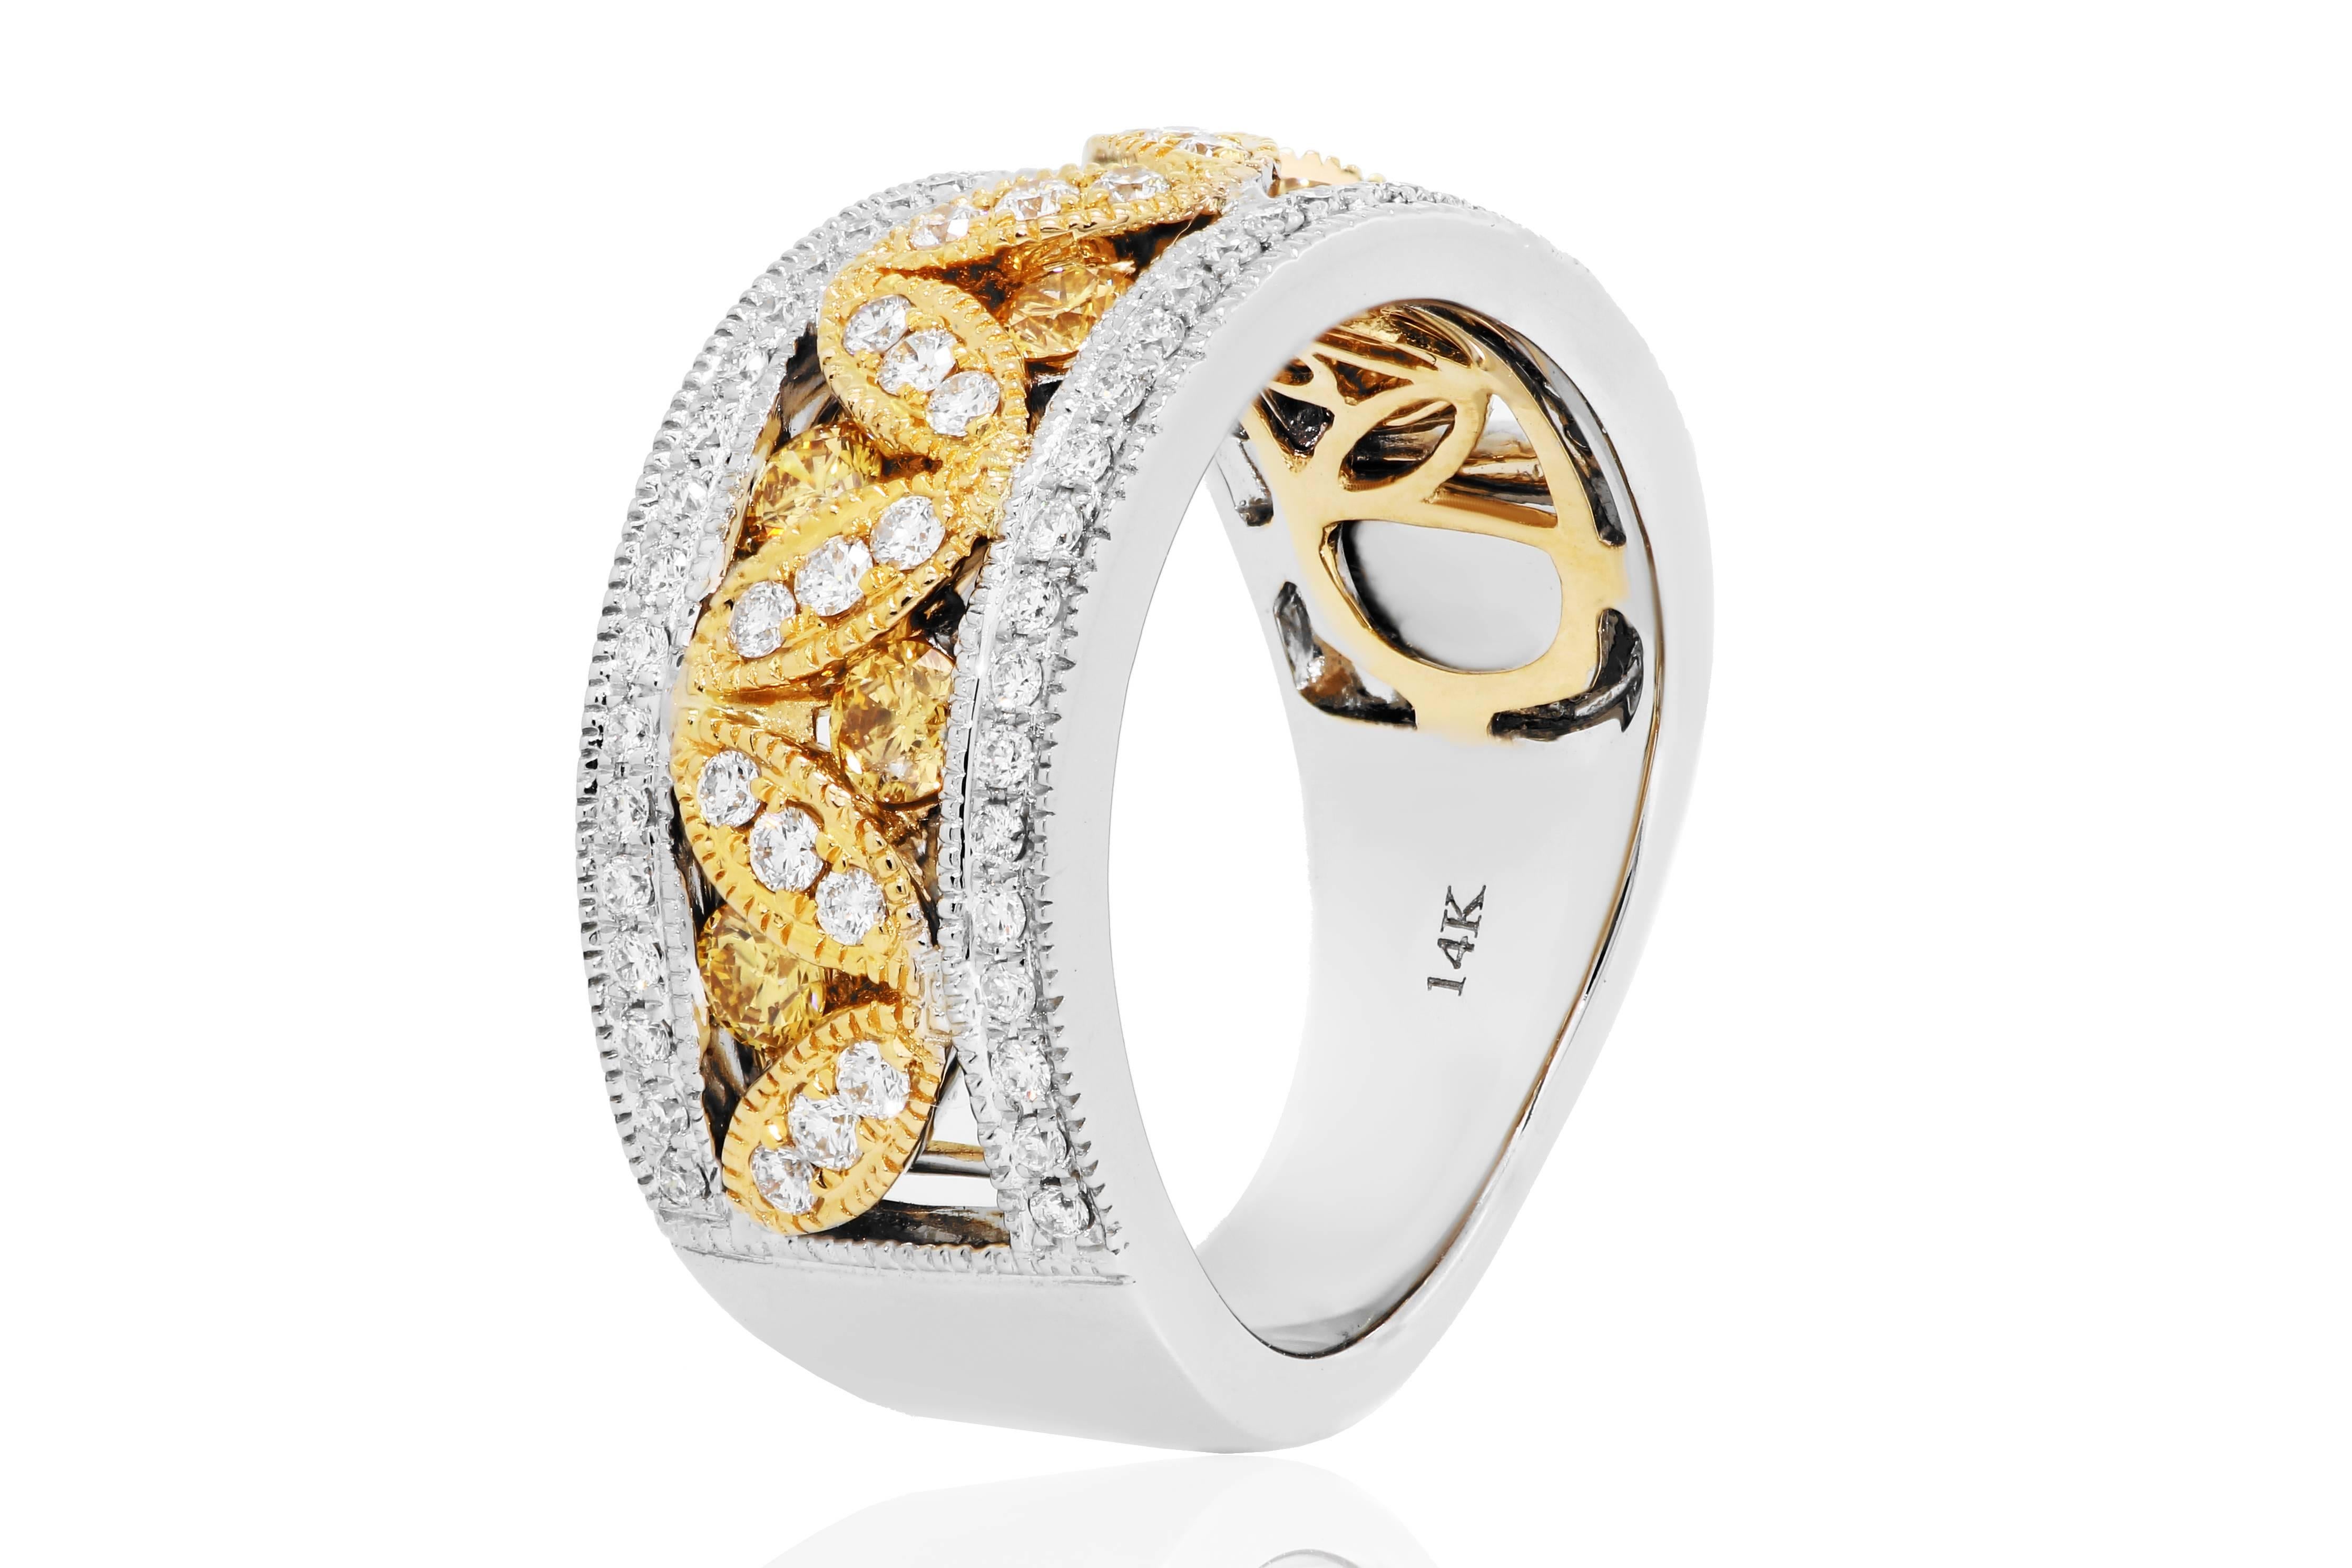 7 Natural Fancy Yellow Rounds 0.50 carat and White Diamond Rounds 0.53 Carat in 14K White and Yellow Gold Filigree Band Ring